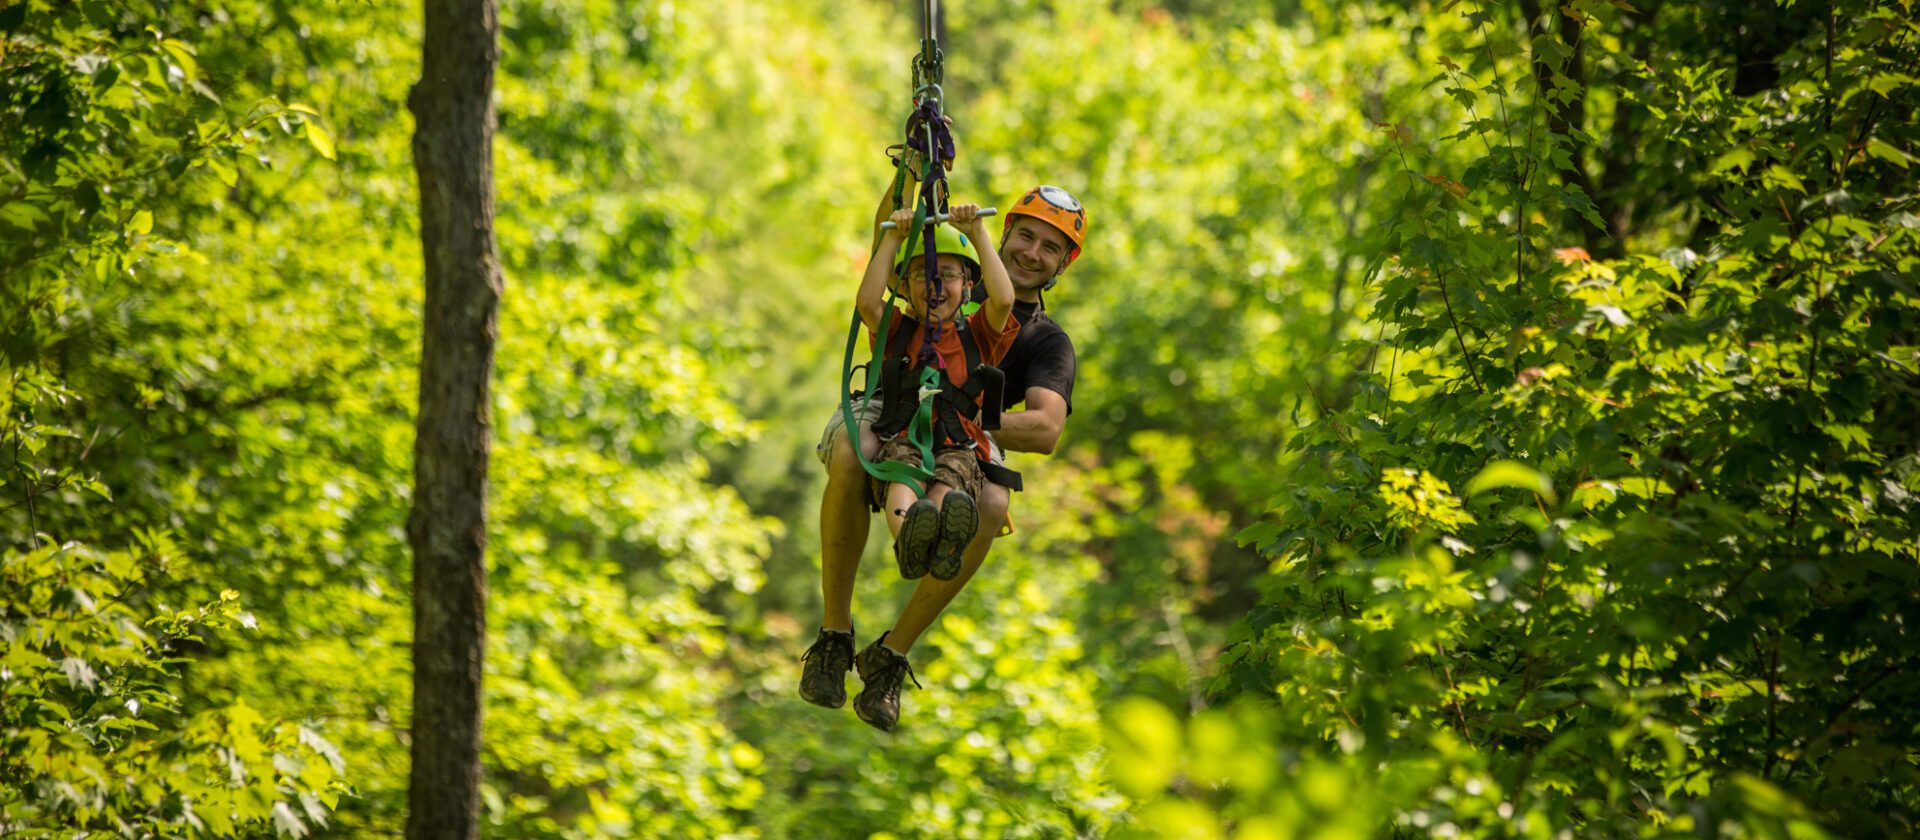 6 Ways Ziplining in the Smoky Mountains Benefits Your Health